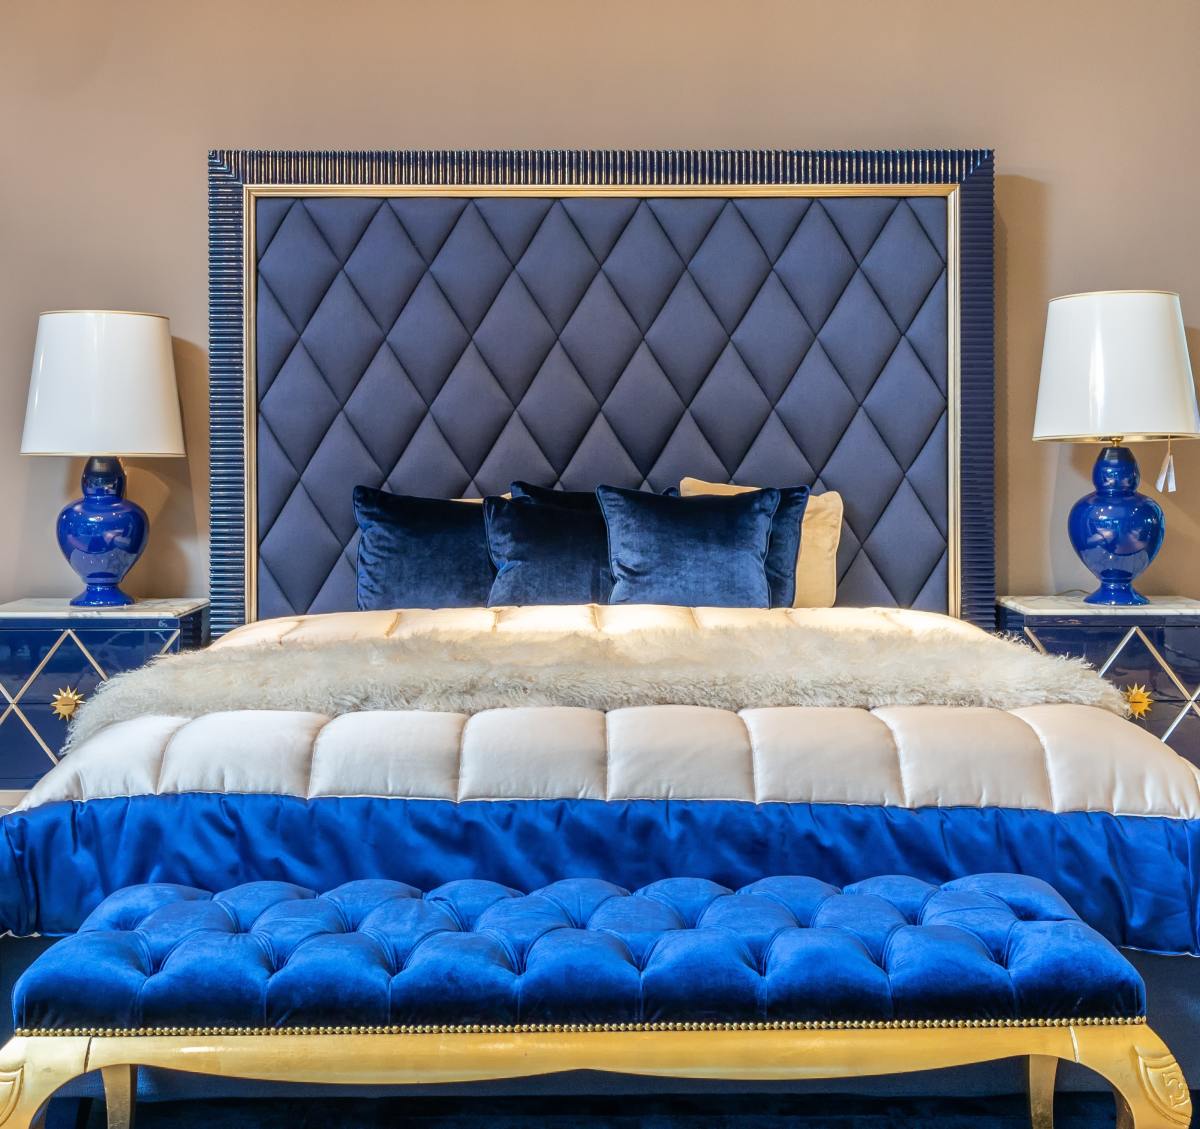 The Monkey in the Chinese Zodiac doesn't always take himself seriously. He is enchanted by the colors blue, white, and gold. These are easy colors to work with in home decor.